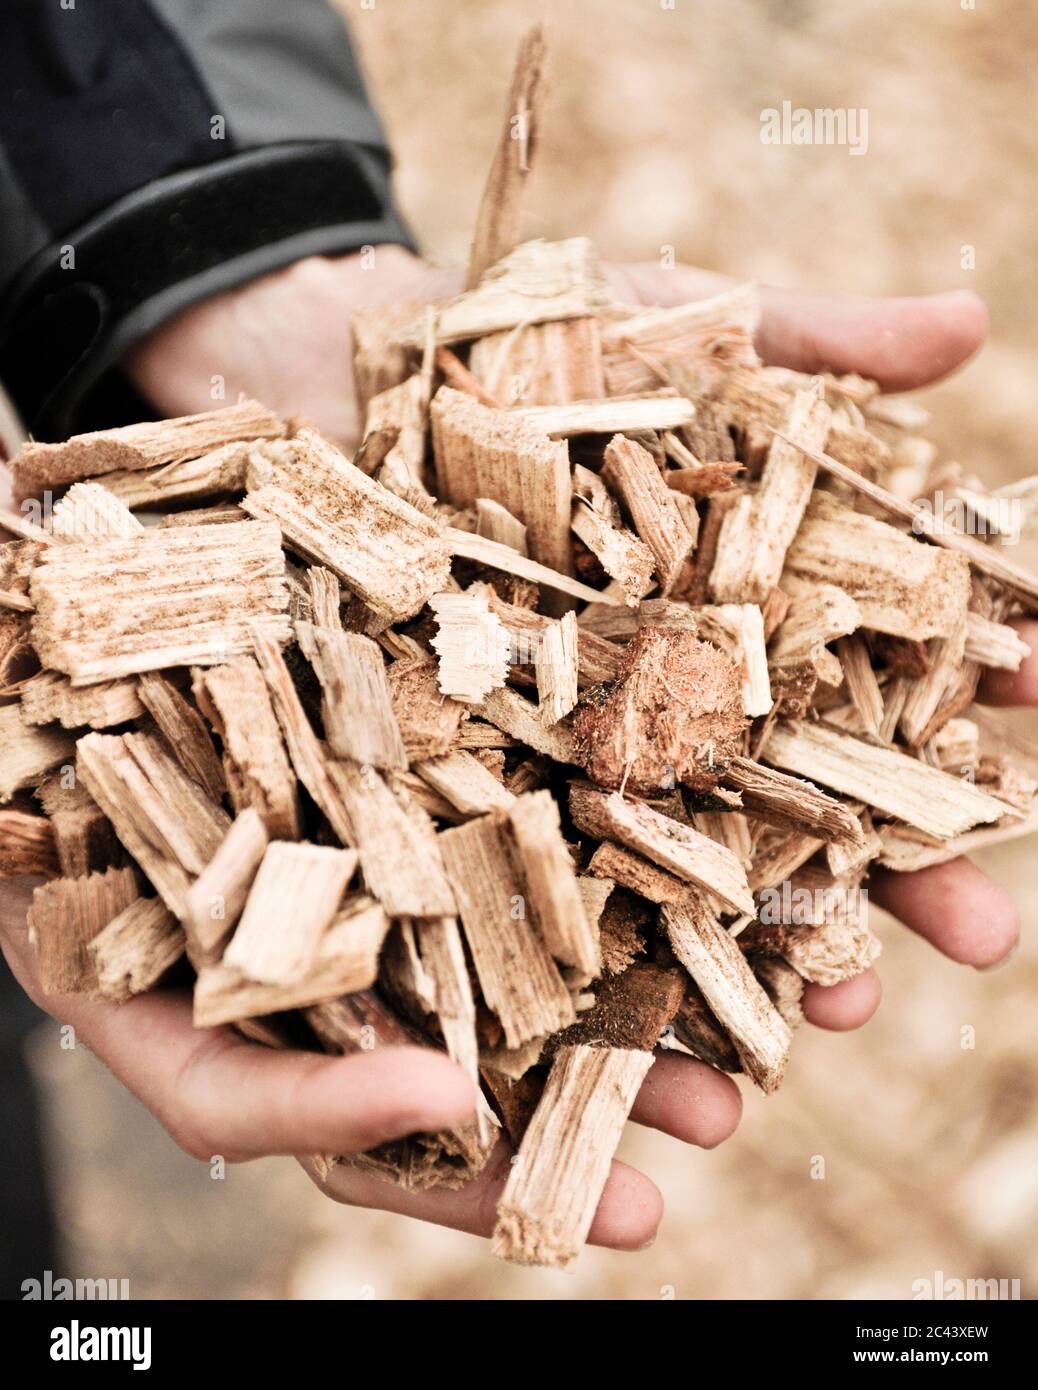 Wood chips for the biomass power plant in Güssing, Austria Stock Photo